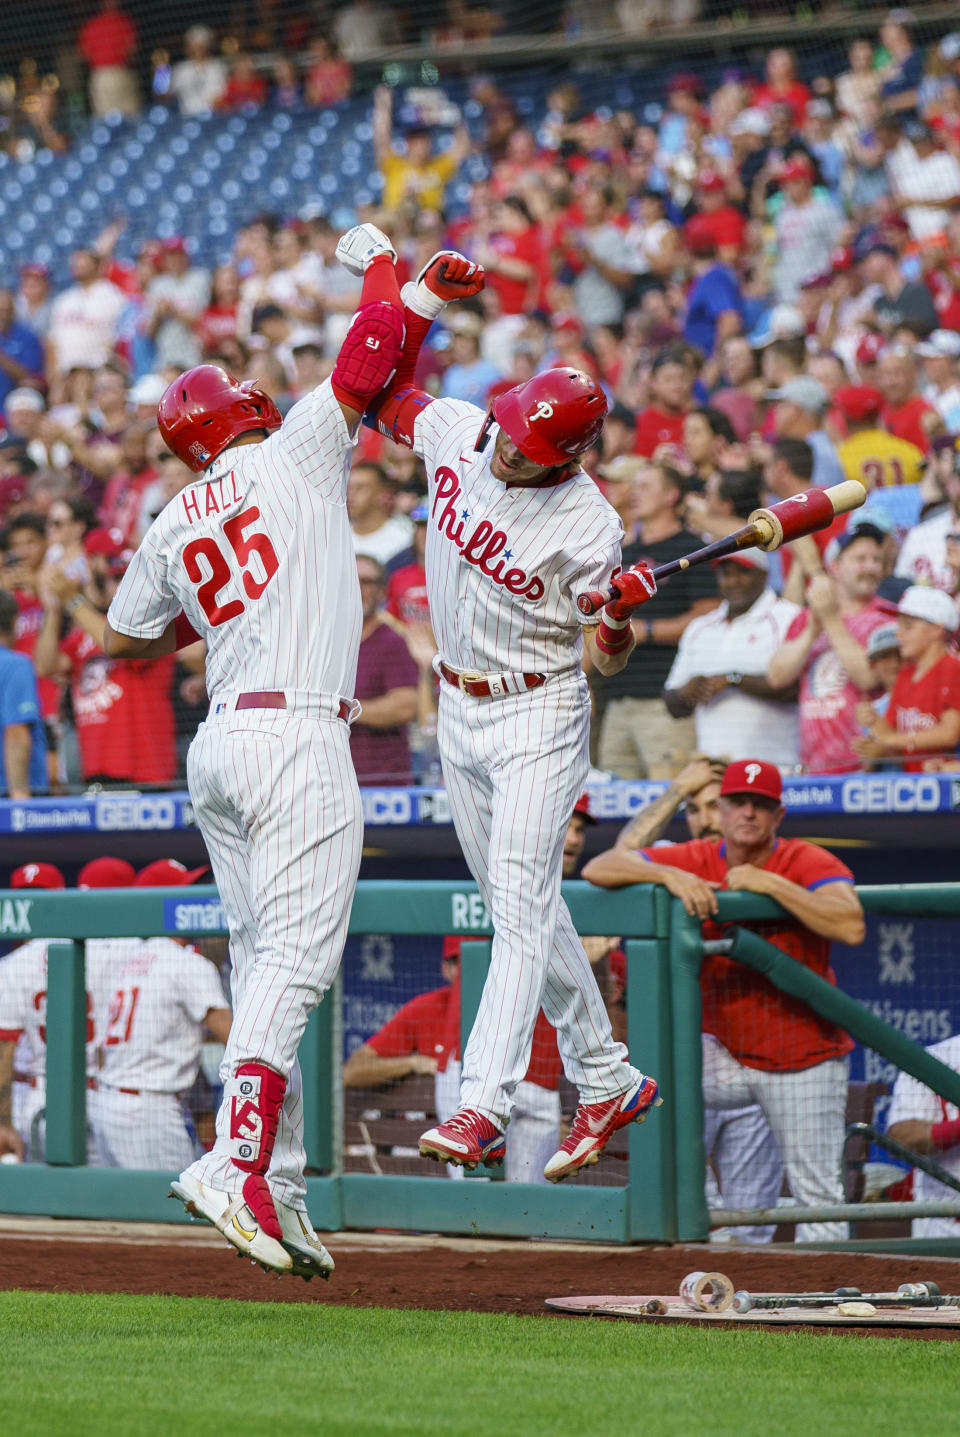 Philadelphia Phillies' Darick Hall, left, celebrates his home run against the Washington Nationals with Bryson Stott during the first inning of a baseball game Friday, Aug. 5, 2022, in Philadelphia. (AP Photo/Chris Szagola)